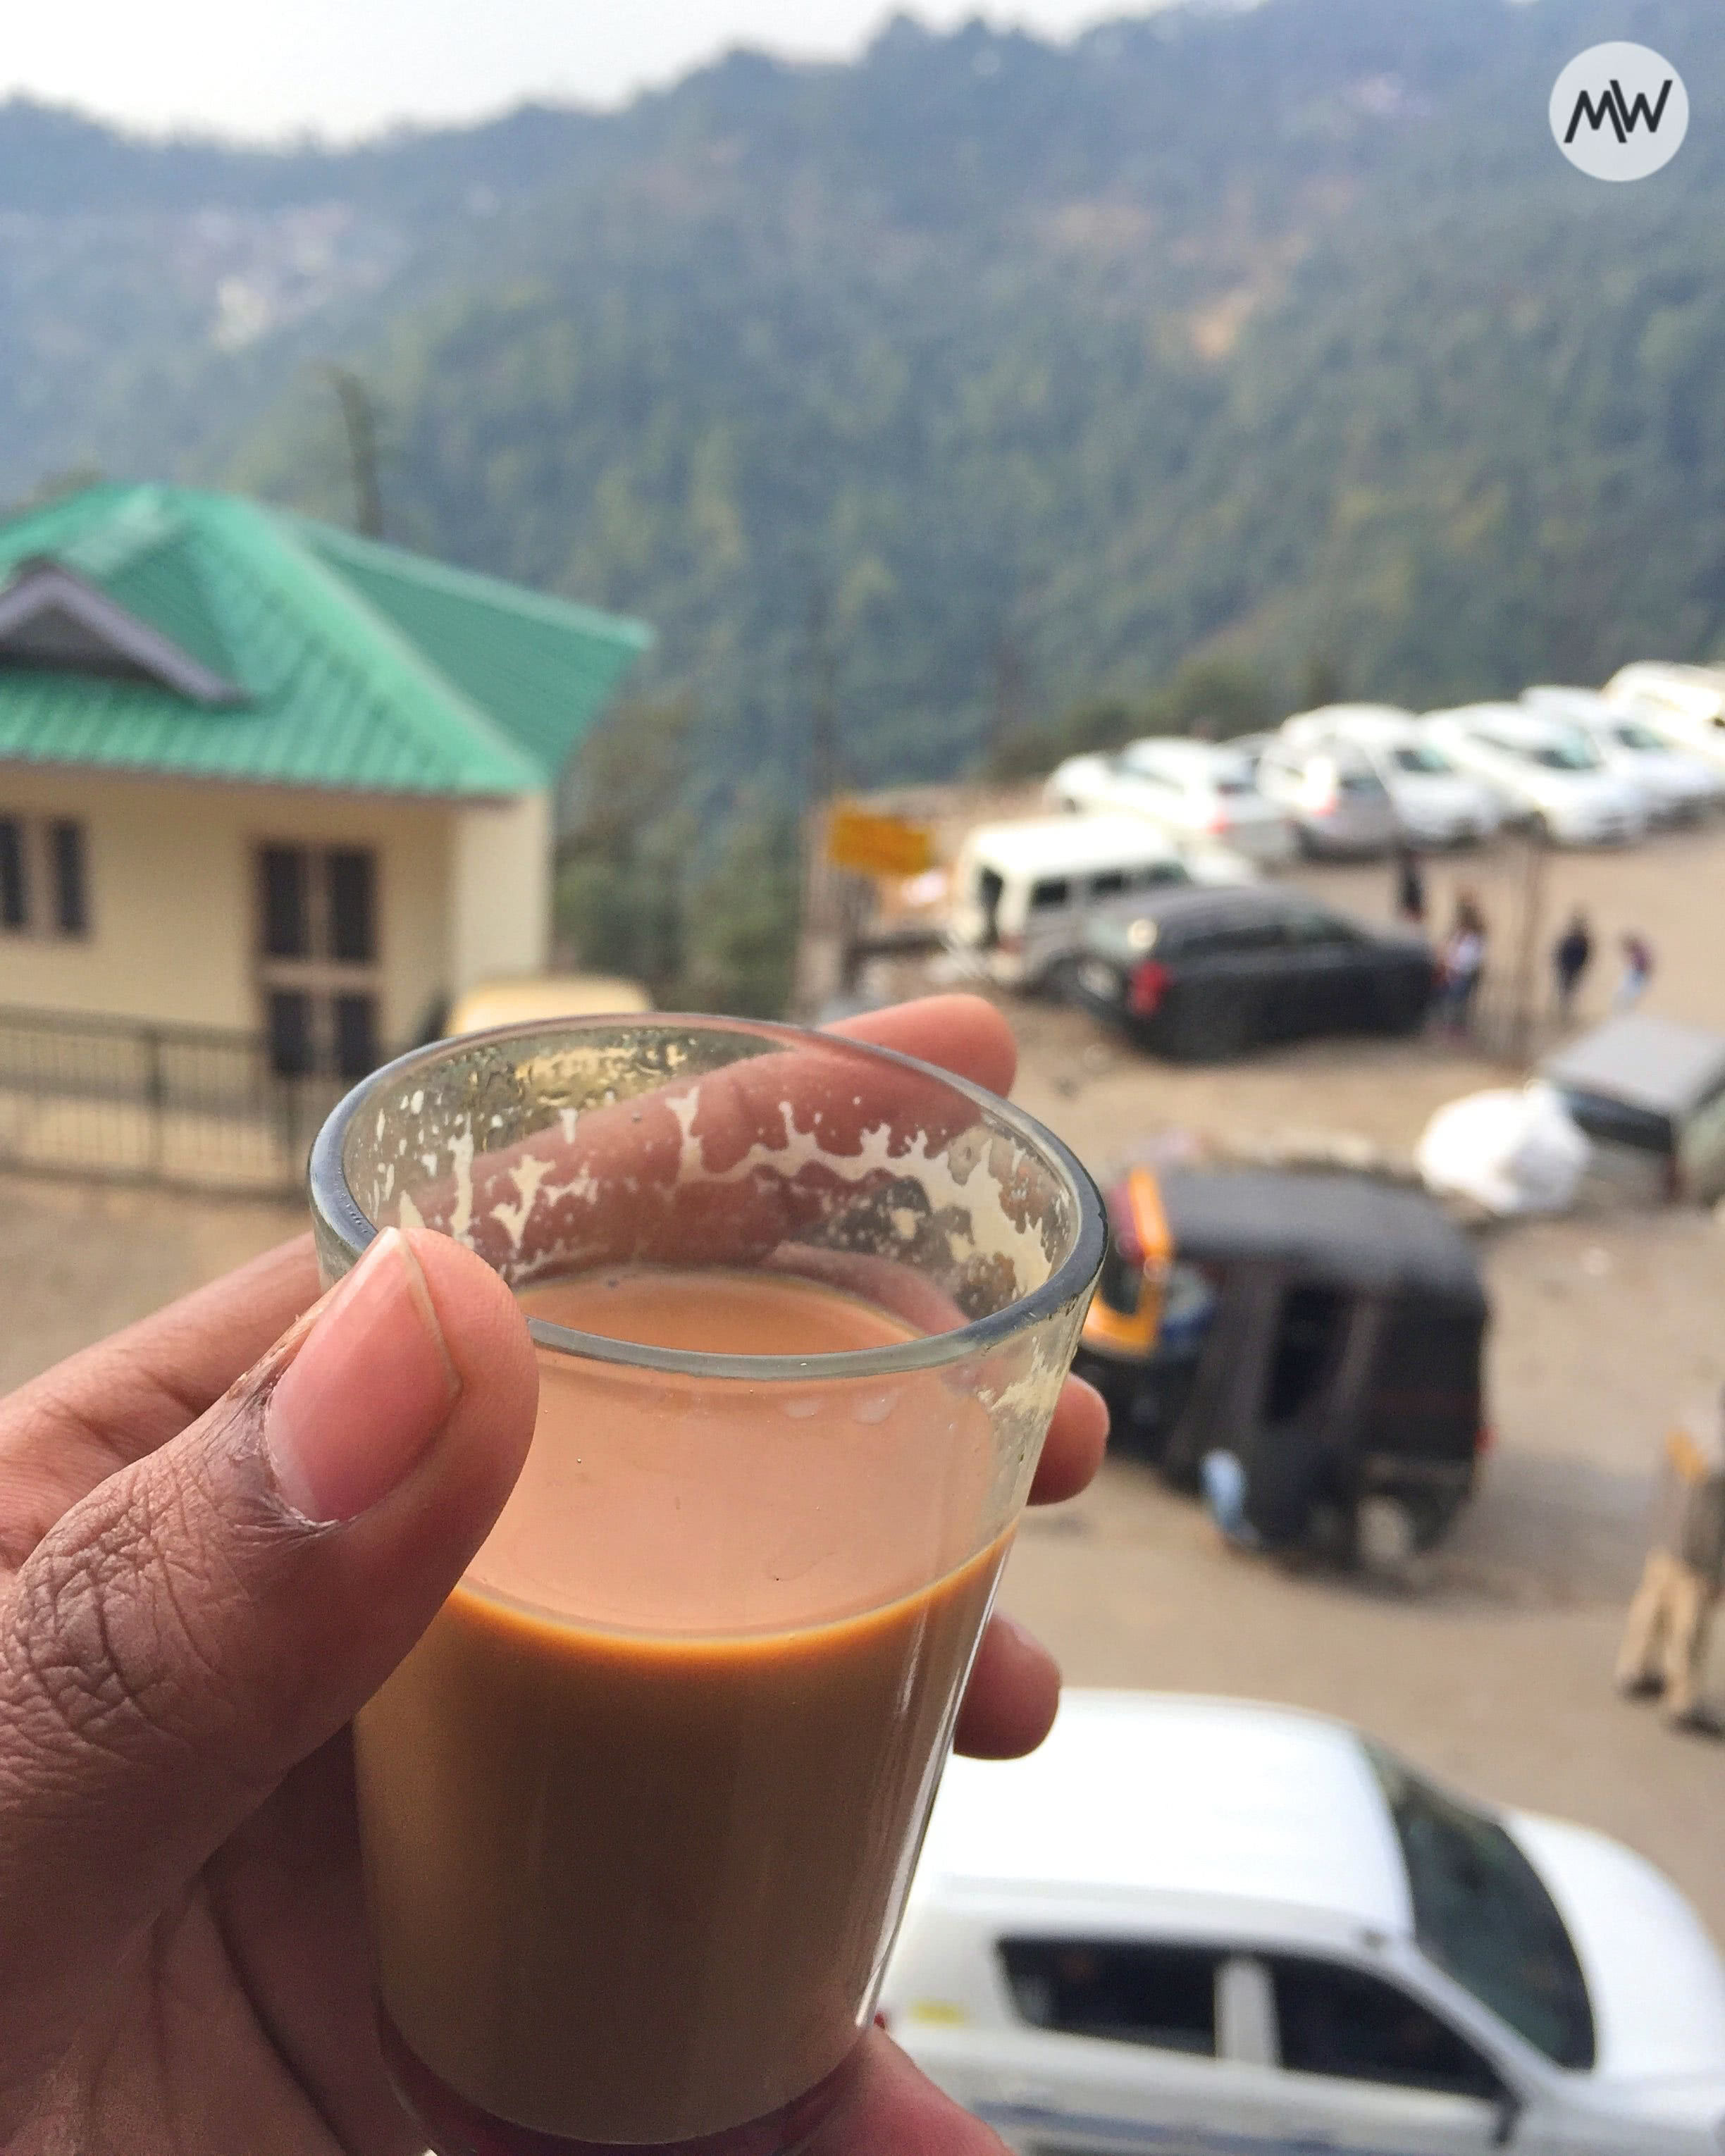 Enjoying my solitude with tea - first solo trip in India